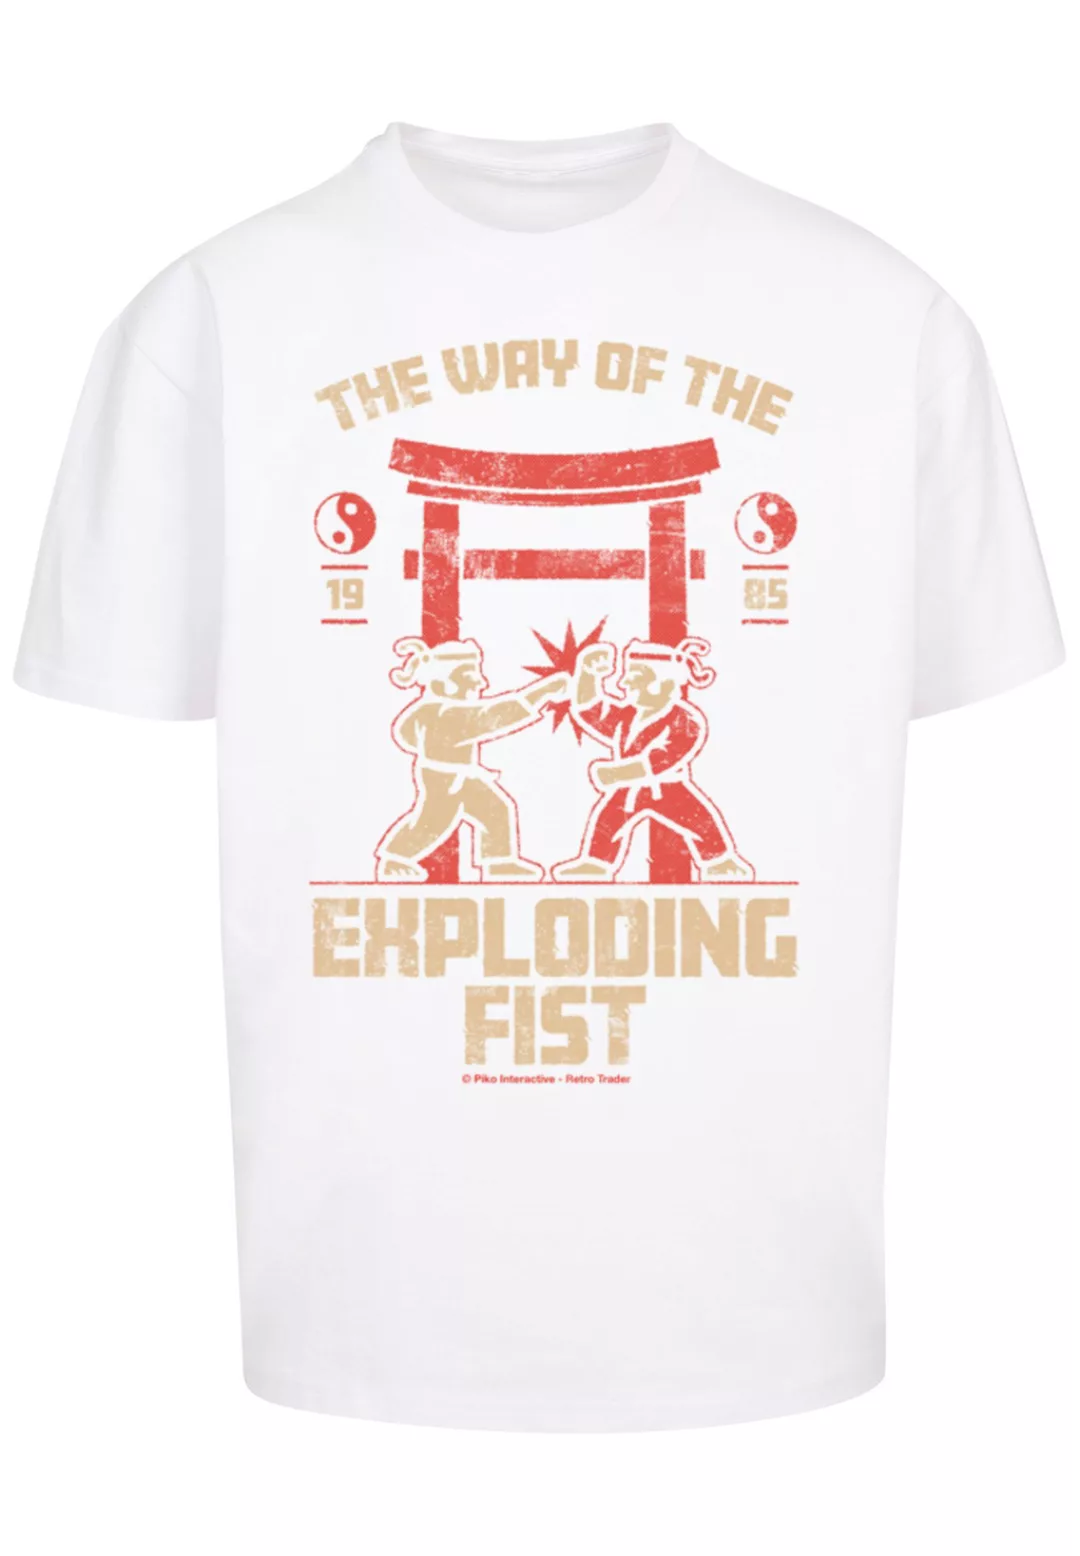 F4NT4STIC T-Shirt "The Way Of The Exploding Fist Retro Gaming SEVENSQUARED" günstig online kaufen